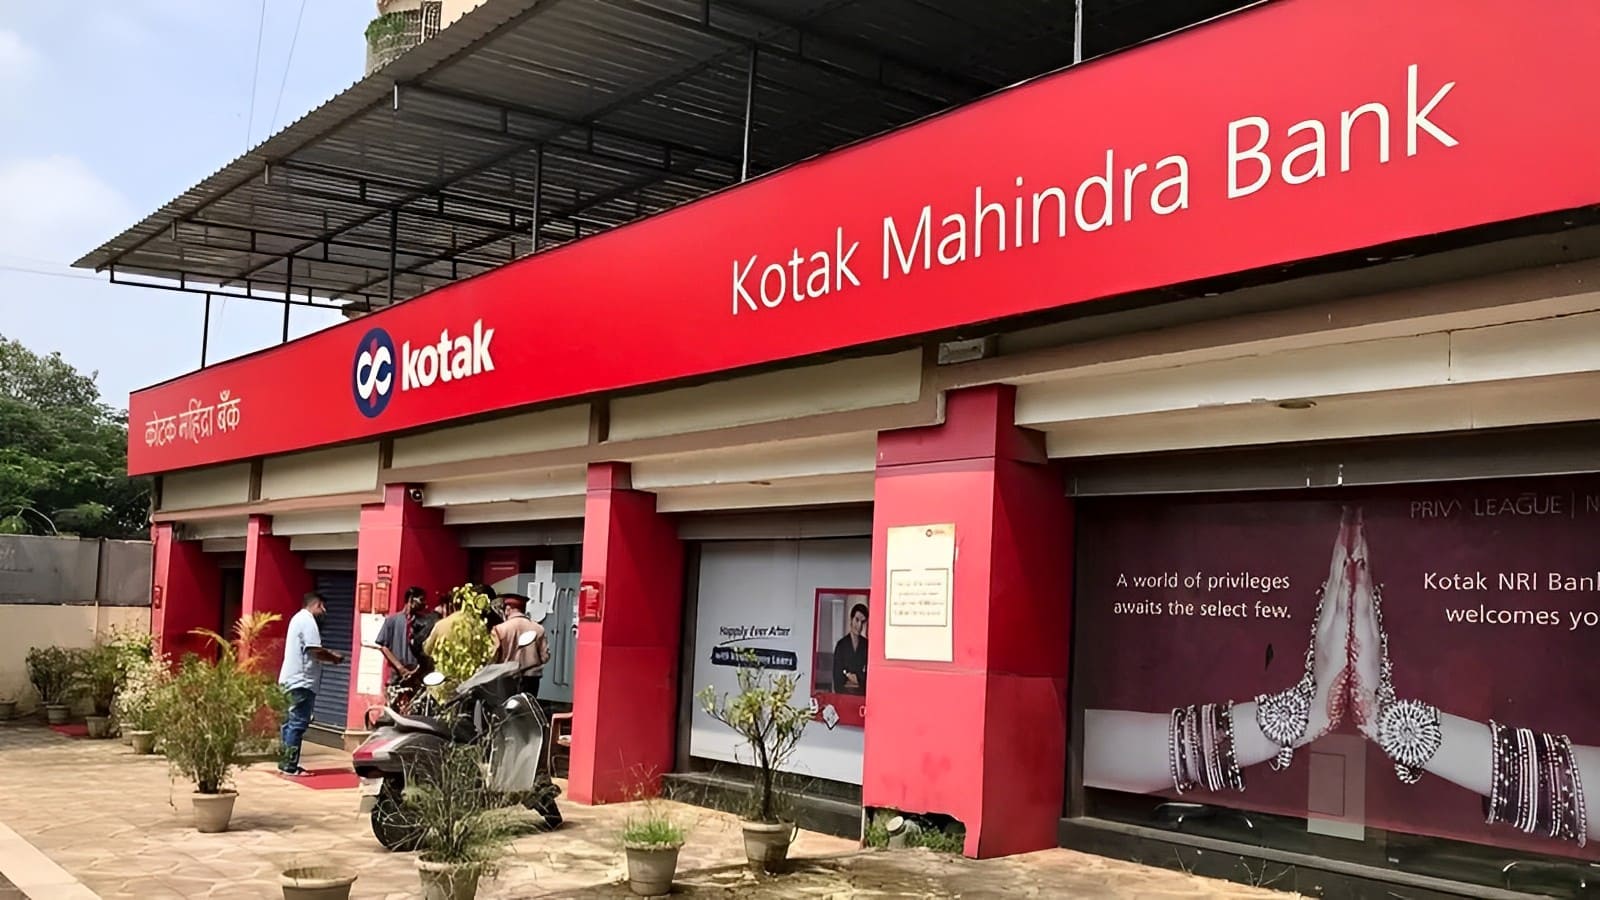 Kotak Mahindra Bank arm secures $1.25B for 2nd distressed asset fund